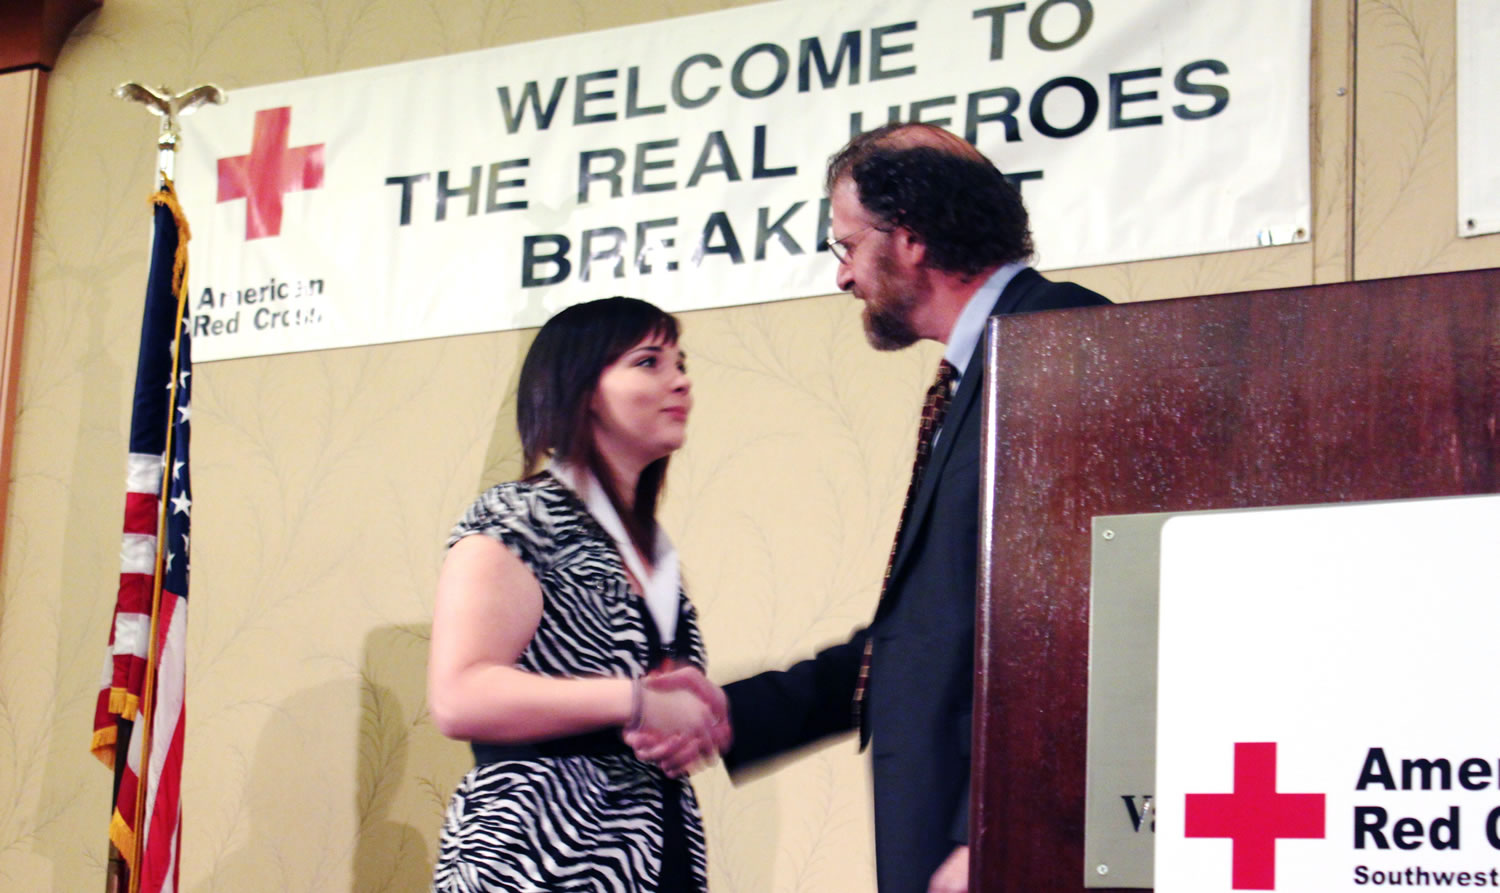 Tiffani Pekkala of Camas  was honored on March 15, 2011, by the Red Cross as a Real Hero for organizing several blood drives and recruiting student donors.